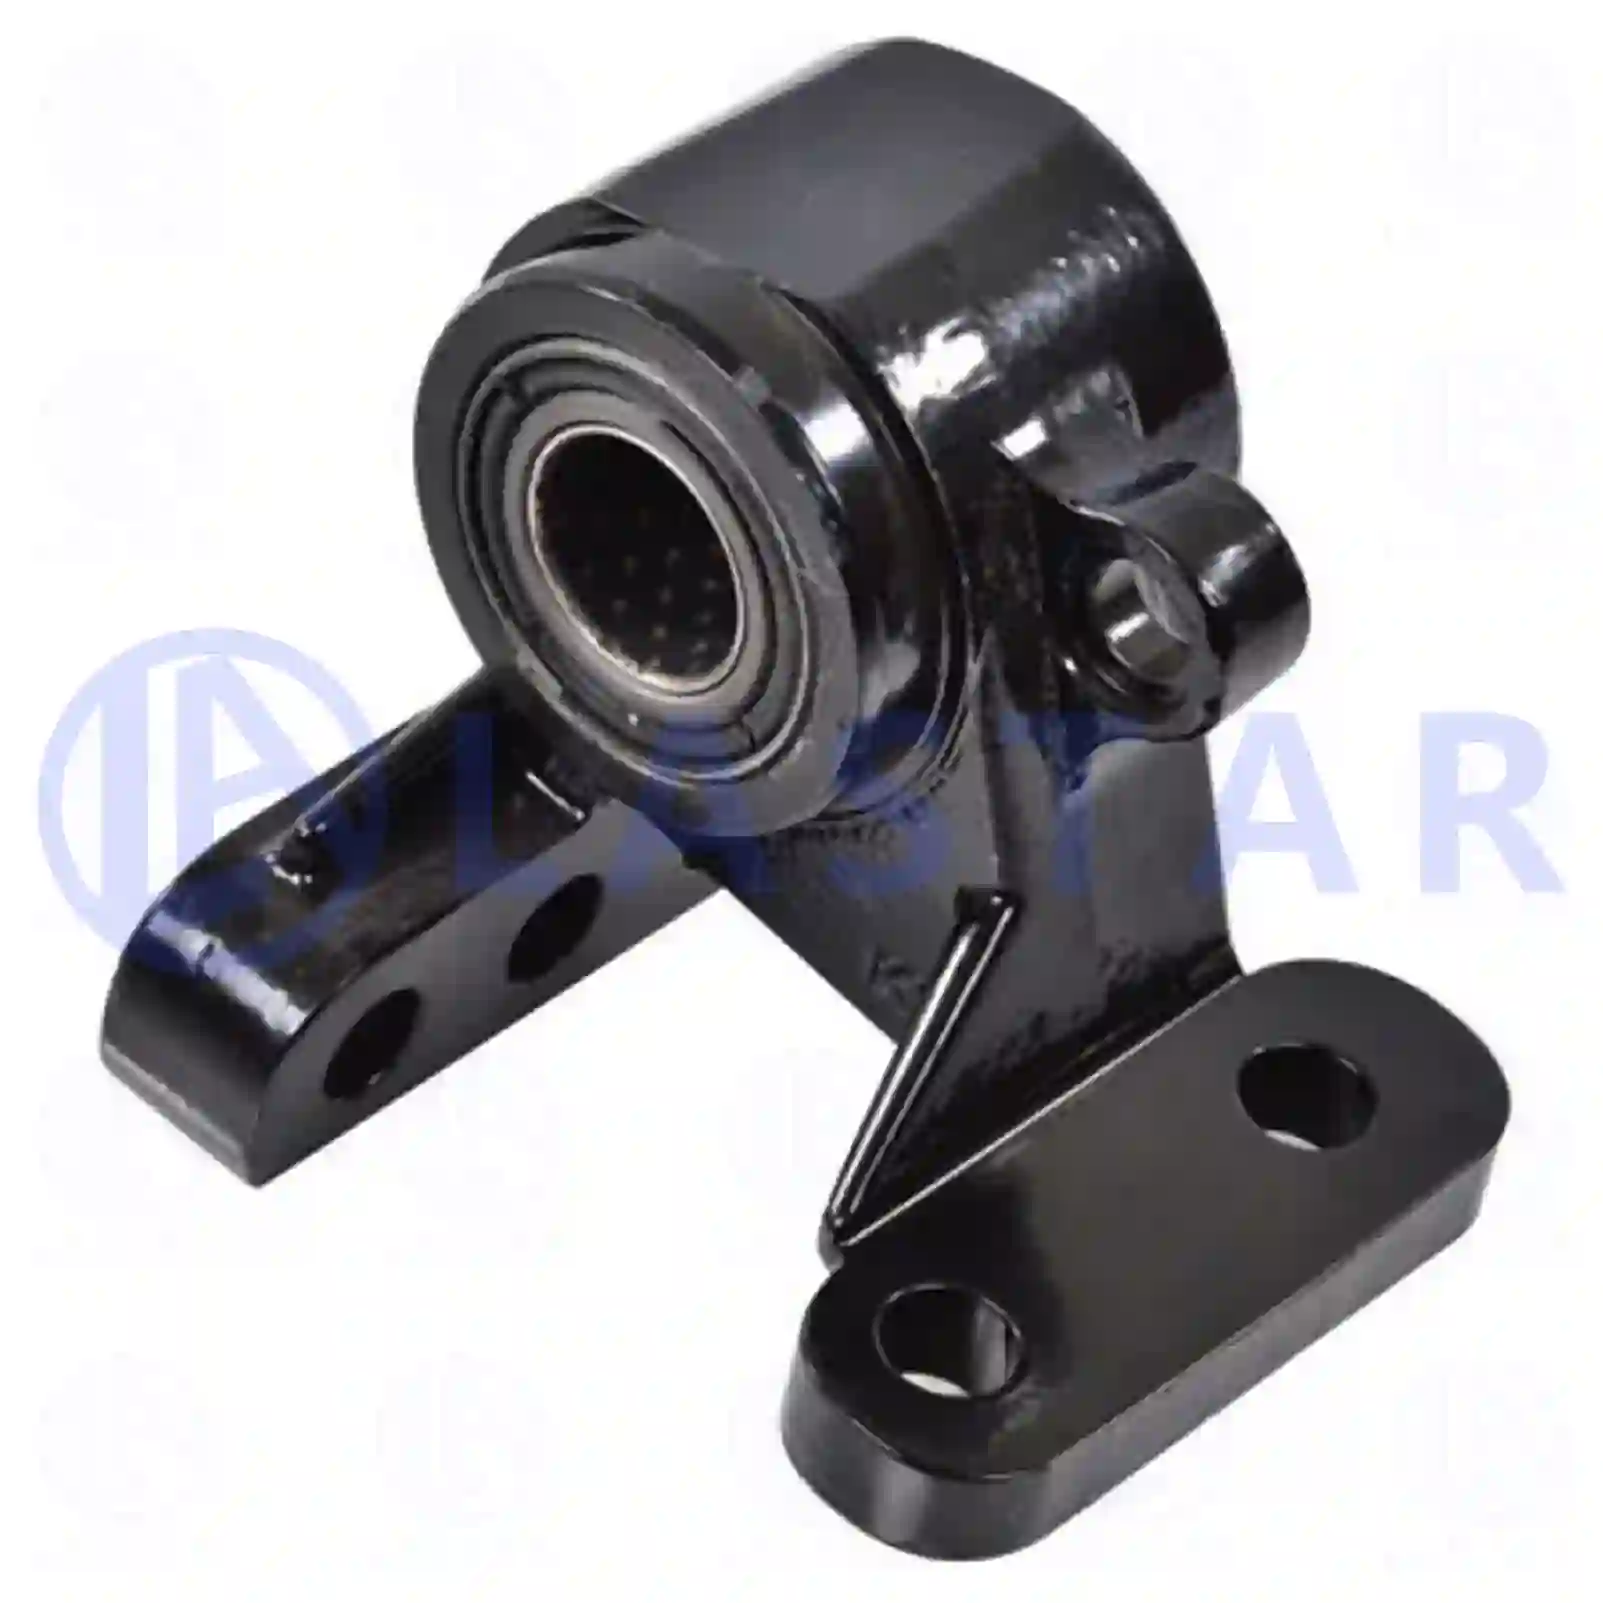 Bearing bracket, cabin suspension, right, 77728706, 1436210, 1440545, ZG40847-0008 ||  77728706 Lastar Spare Part | Truck Spare Parts, Auotomotive Spare Parts Bearing bracket, cabin suspension, right, 77728706, 1436210, 1440545, ZG40847-0008 ||  77728706 Lastar Spare Part | Truck Spare Parts, Auotomotive Spare Parts